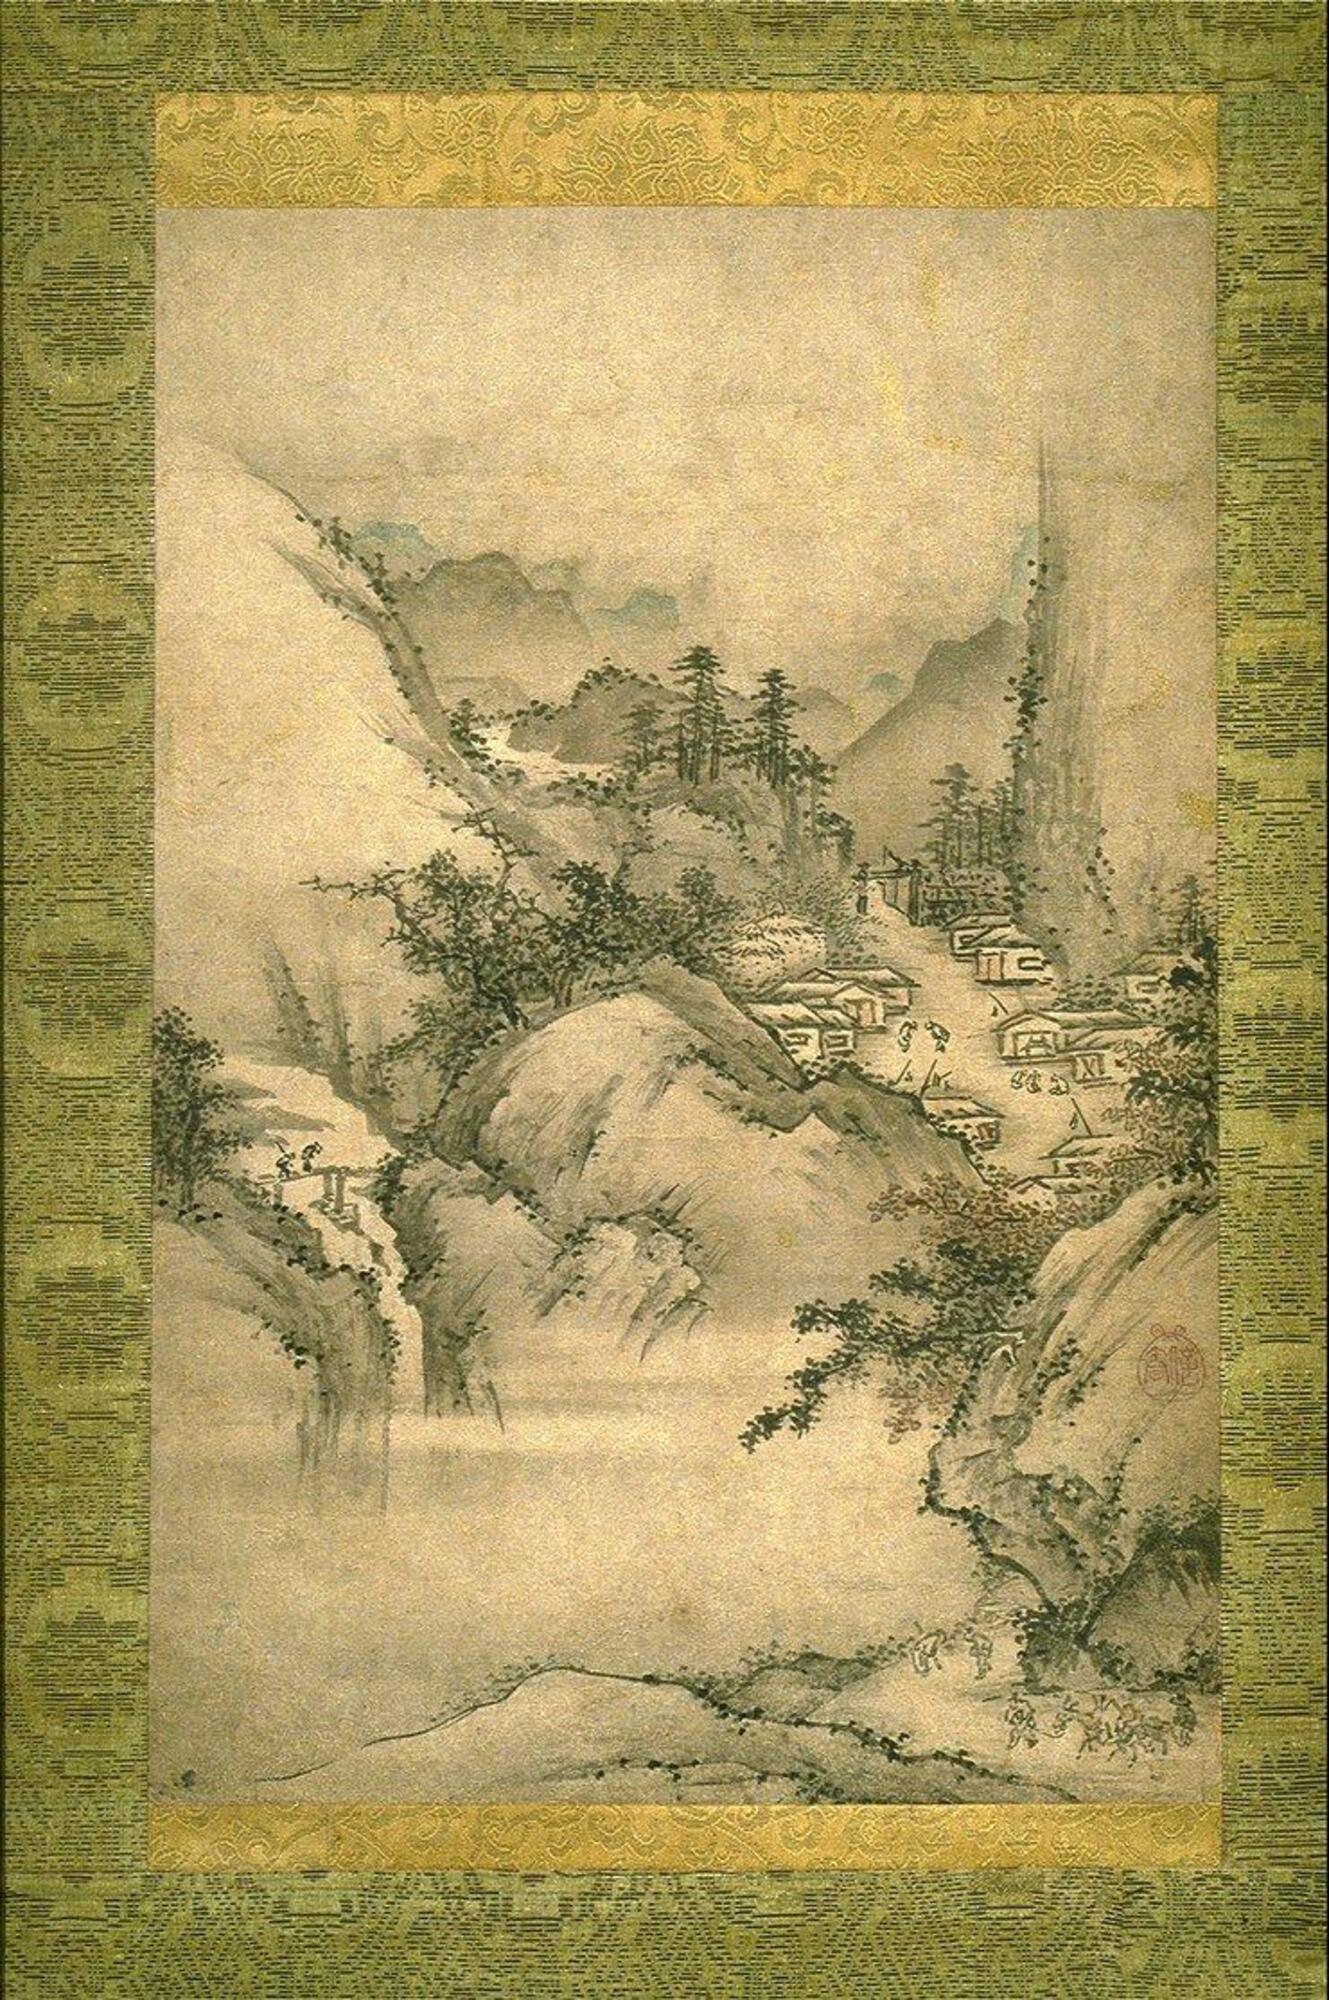 This is a vertical format painting surrounded by green and gold fabric. It is painted in tones of black with some areas of pink and blue color. It depicts a landscape scene with a cluster of small houses nestled in a craggy mountainous area. There is a river that runs through the landscape with two figures crossing a small footbridge. Other figures are shown in the open area of the village. The trees and vegetation are painted with short abbreviated brushstriokes.